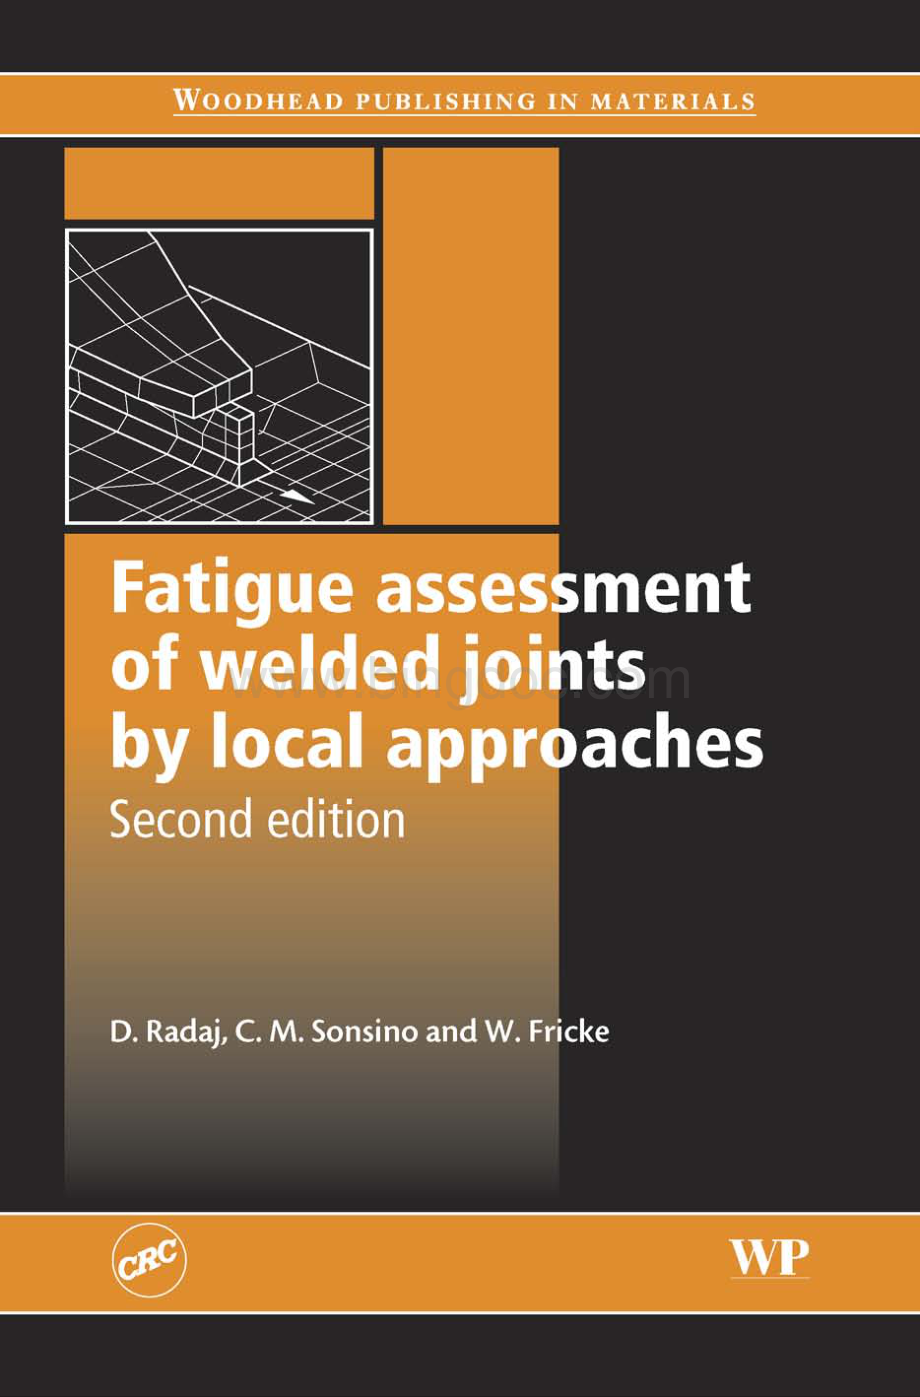 Fatigue Assessment of Welded Joints by Local Approaches.pdf_第1页